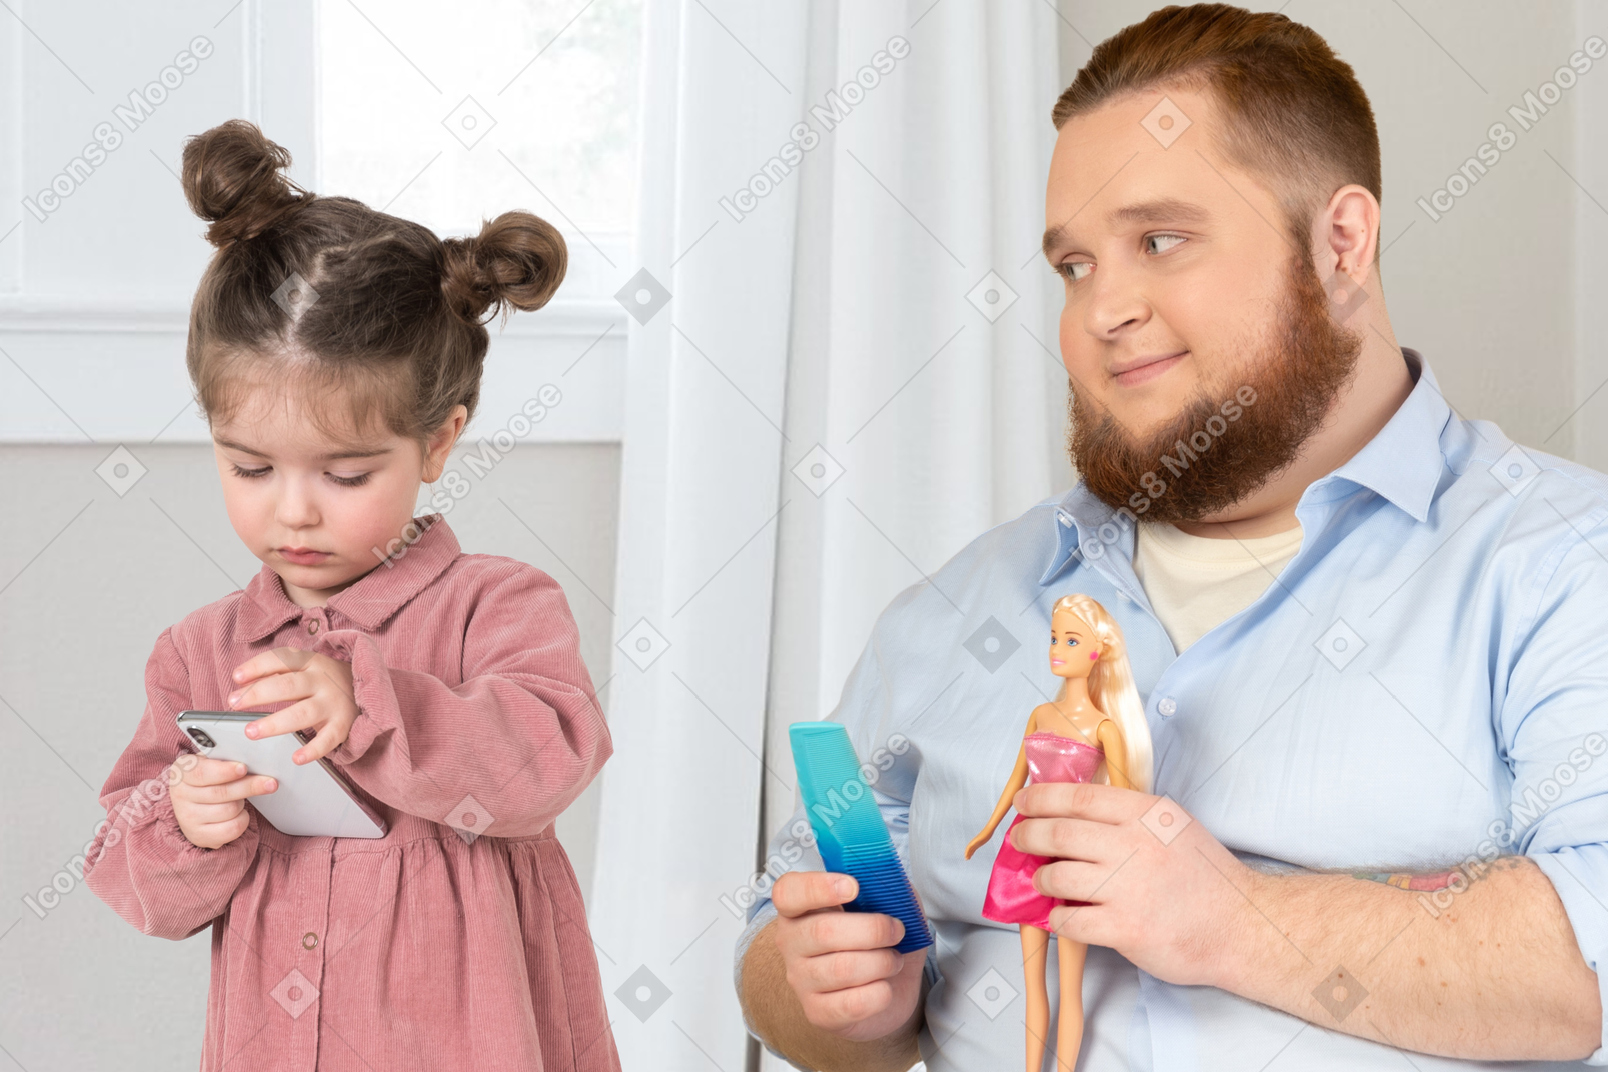 A doctor giving a child a bottle of water